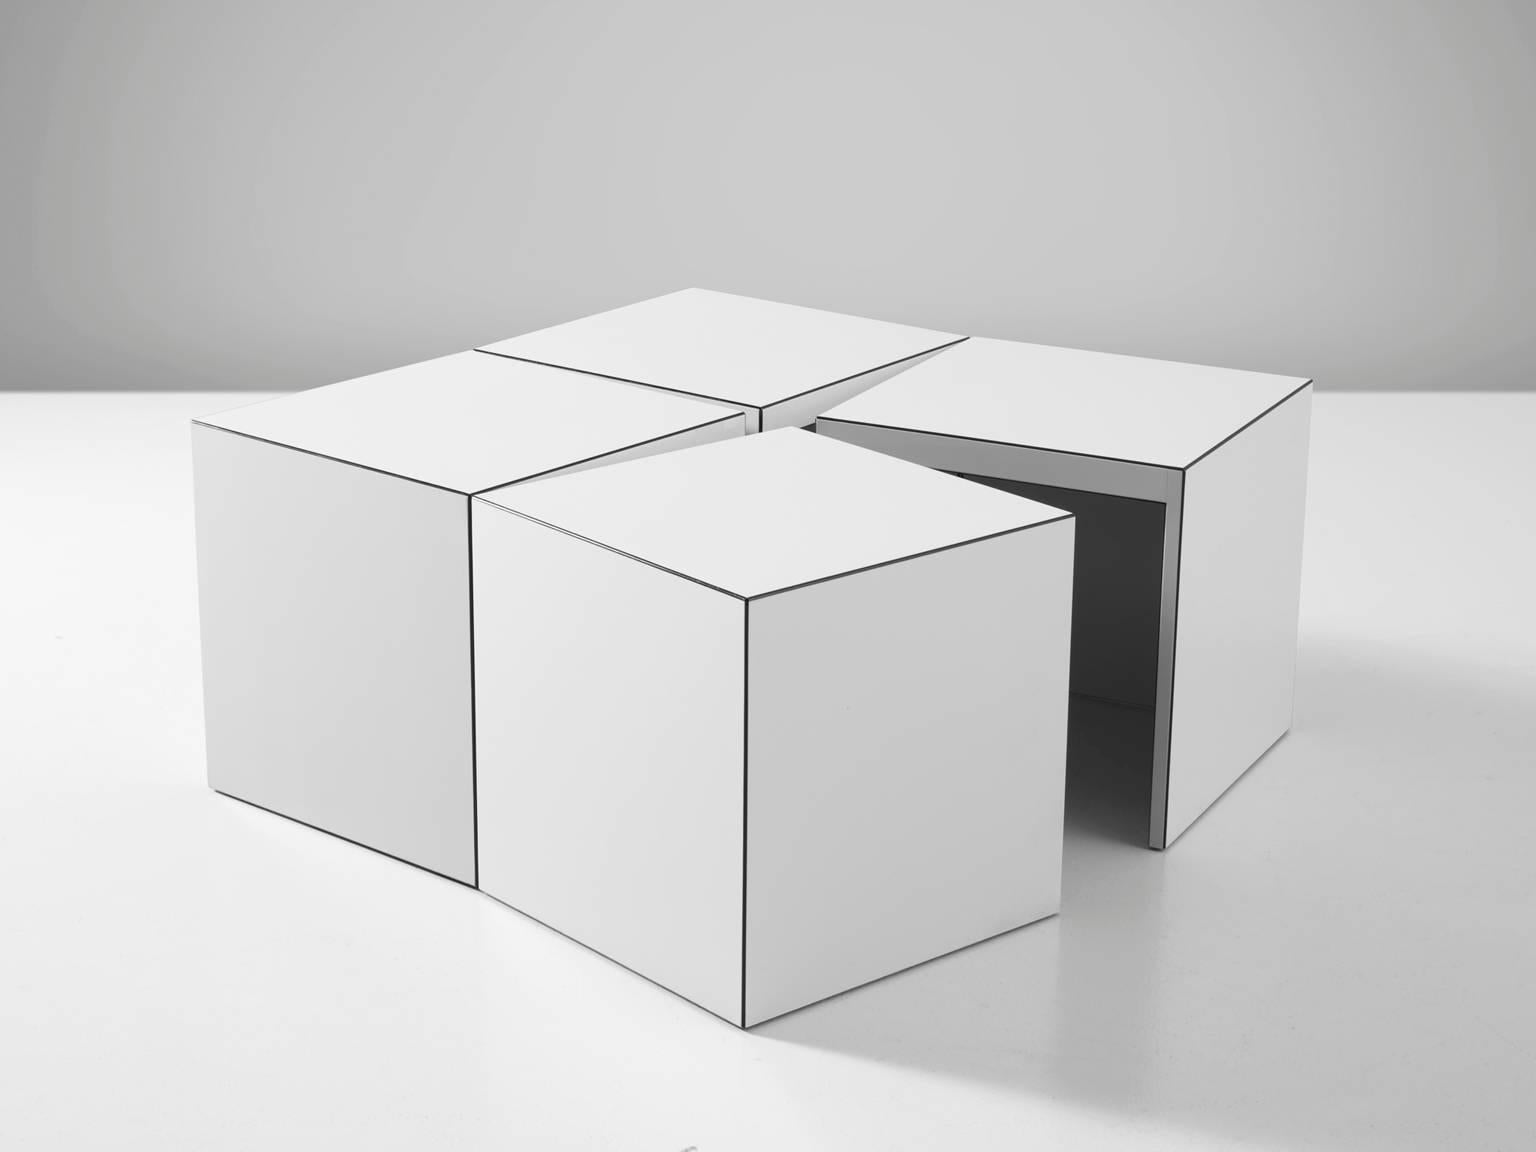 'Domino' coffee table designed by Jan Wichers and Alexander Blomberg for by Rosenthal, Munich Germany, white acrylic on building board, Germany, 1979. Manufactured 

This versatile coffee table or sideboard can easily be transformed into several